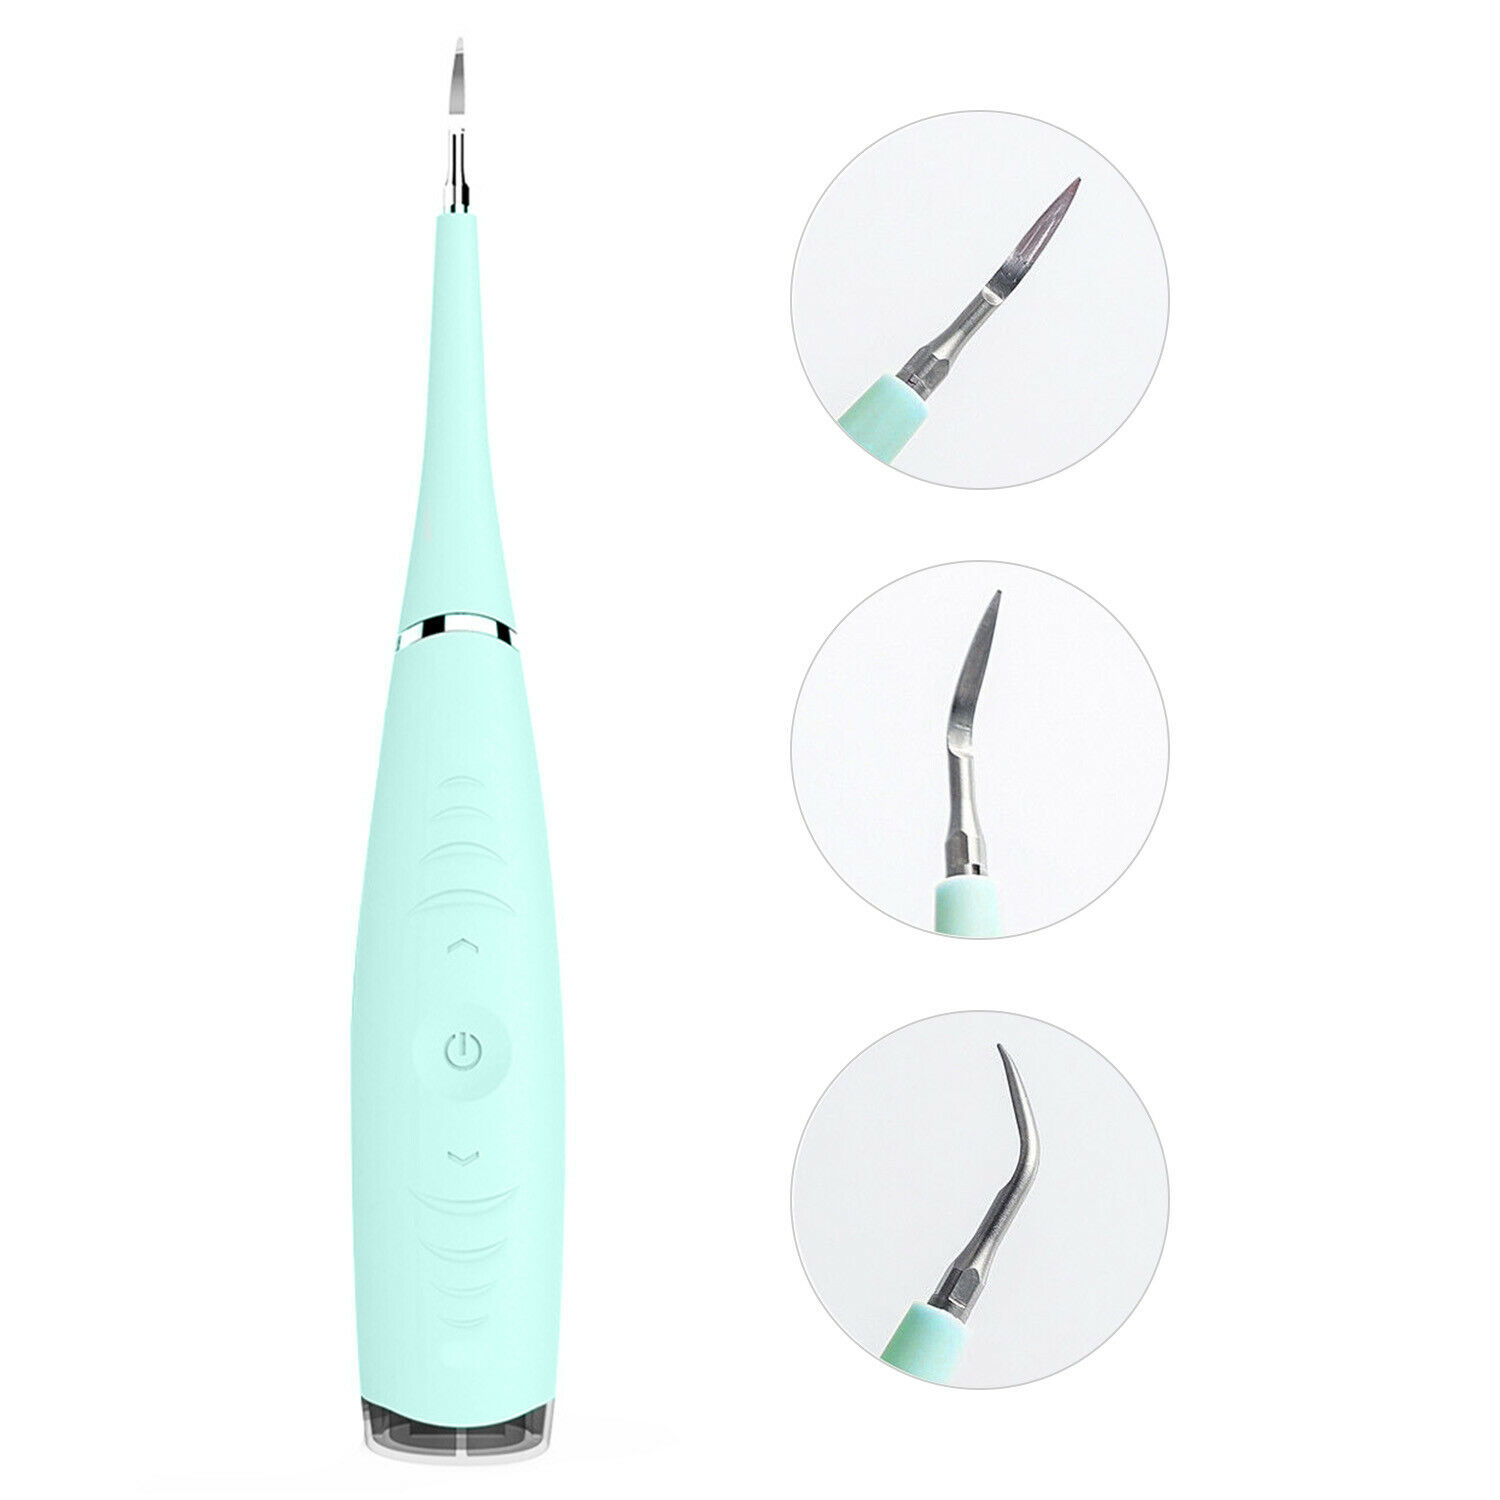 Portable Electric Sonic Dental Scaler Tooth Calculus Remove Tooth Wihtening Tool Green - image 5 of 6